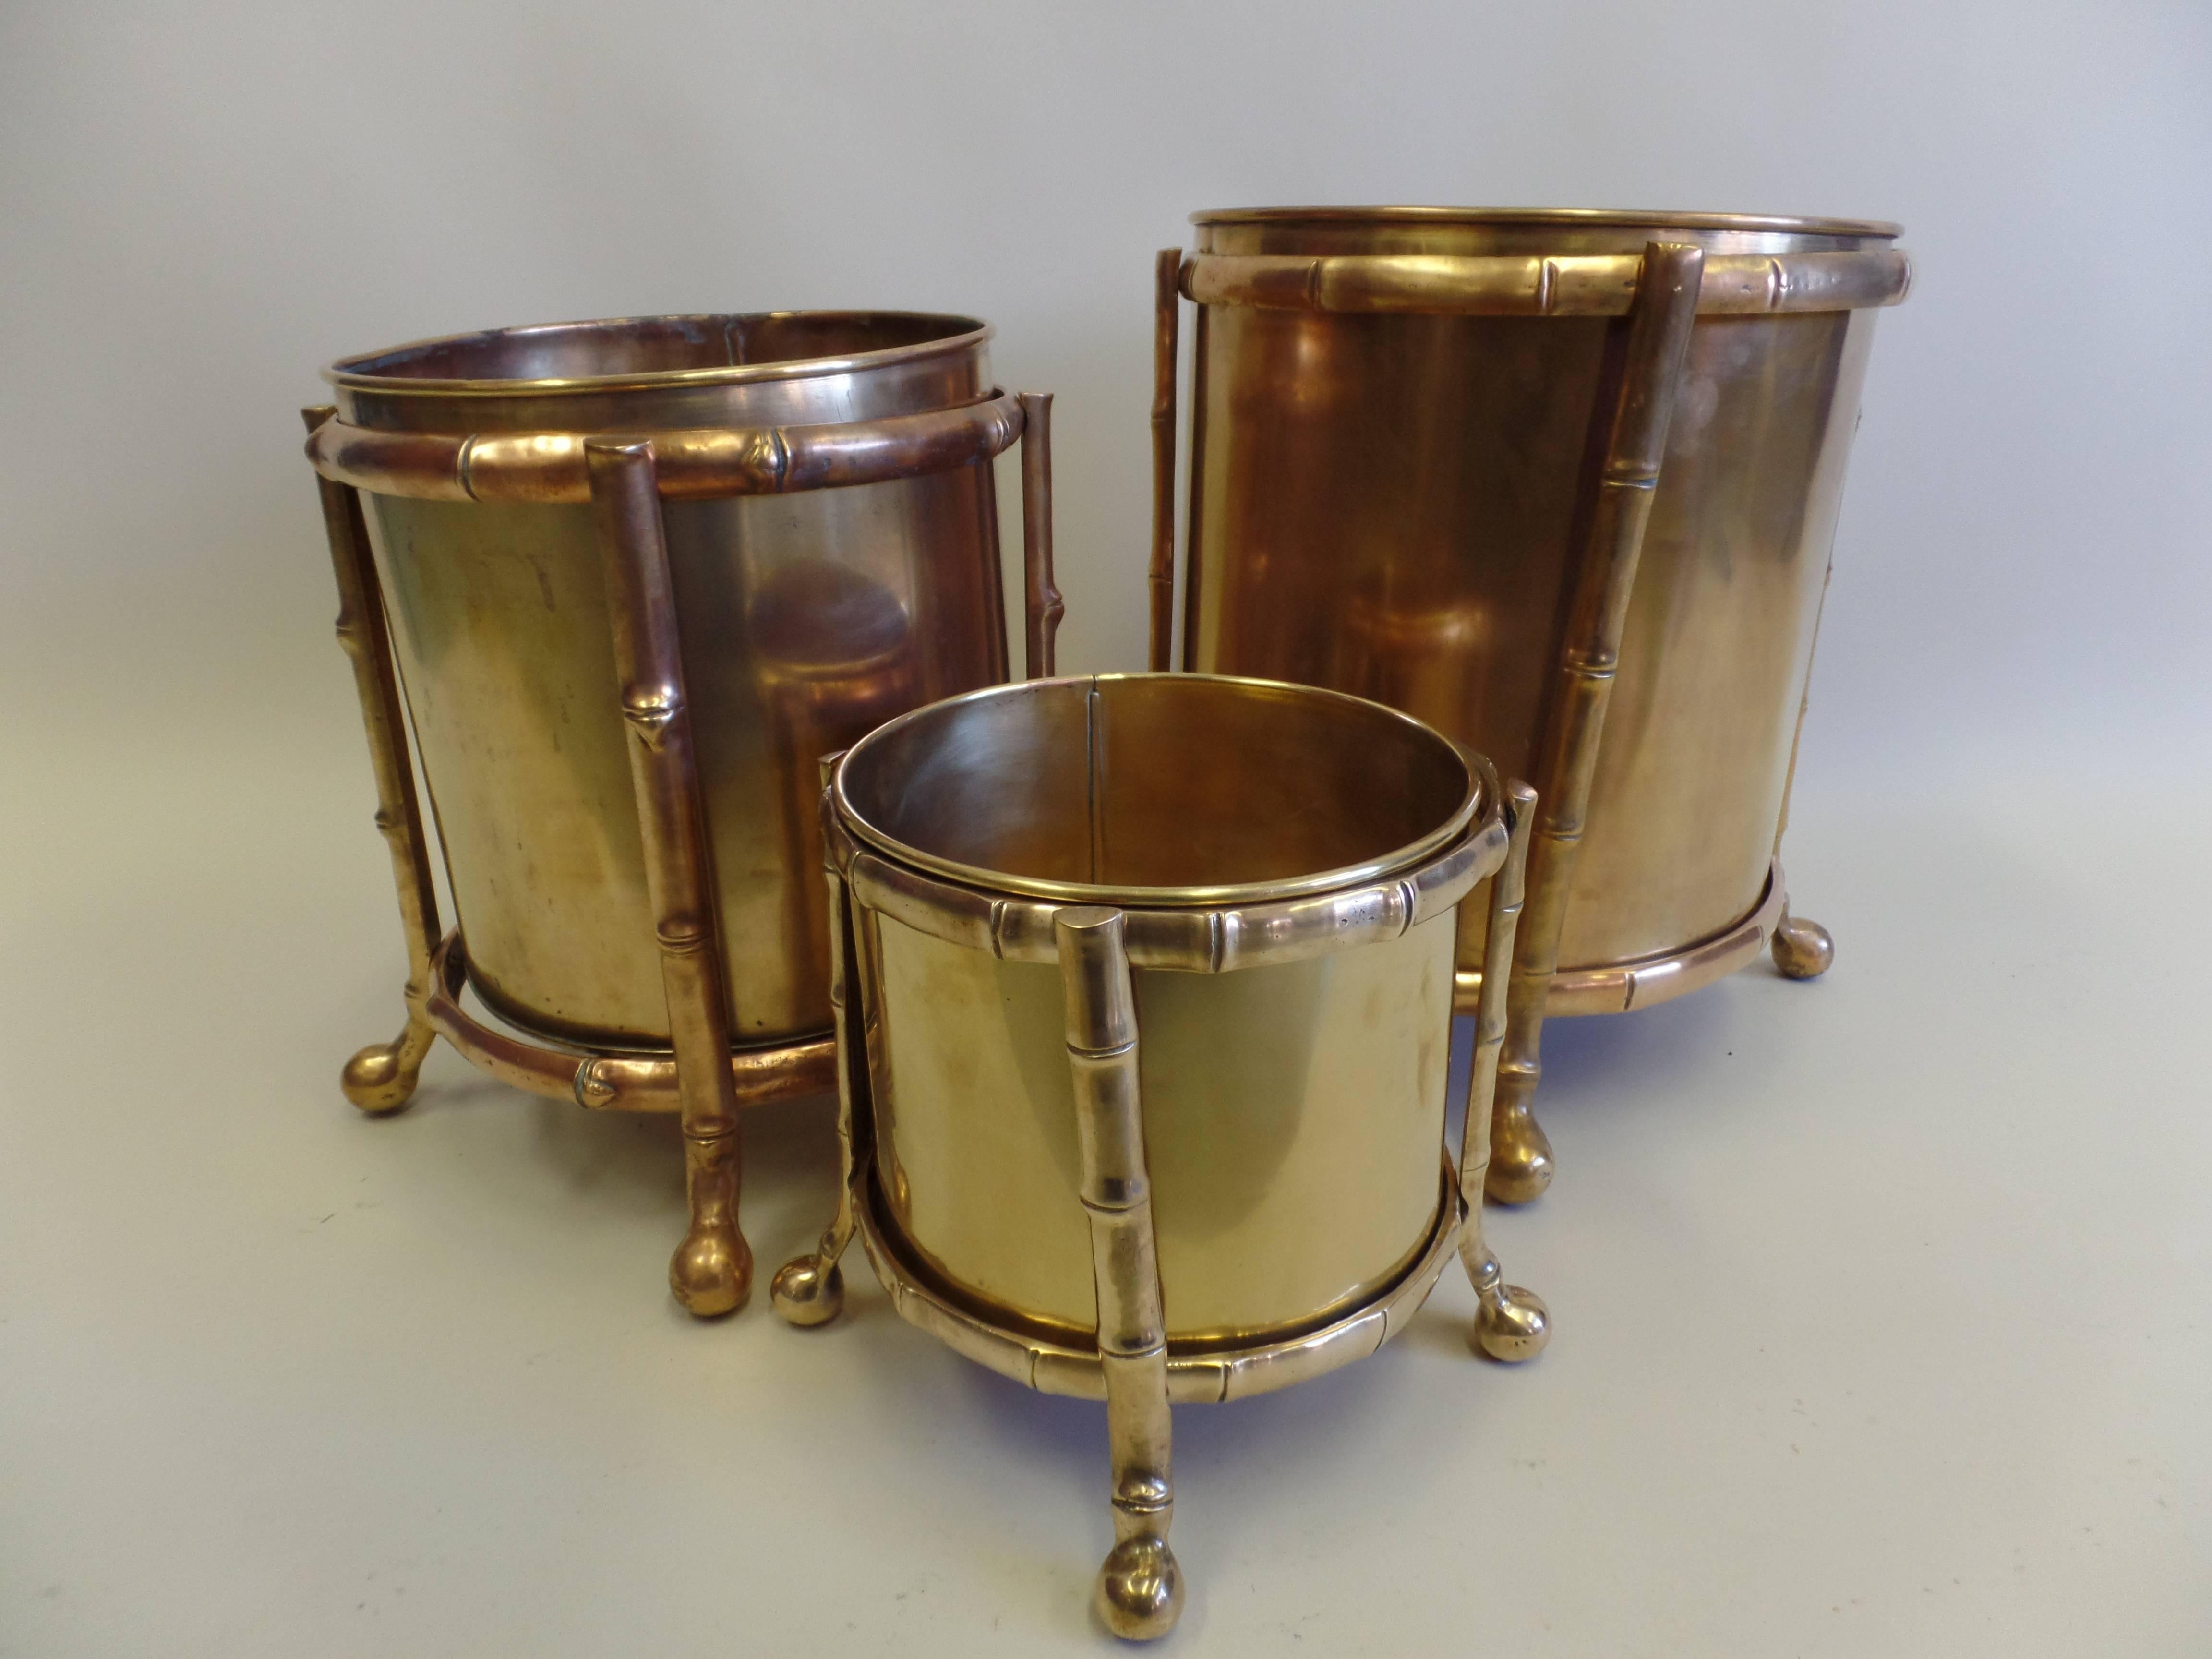 Three Rare French Mid-Century Modern Neoclassical bronze and brass umbrella stands / waste baskets by Maison Baguès. 

The pieces are composed of a delicately cast bronze frames with removable bronze baskets / cans set into the frames. The pieces